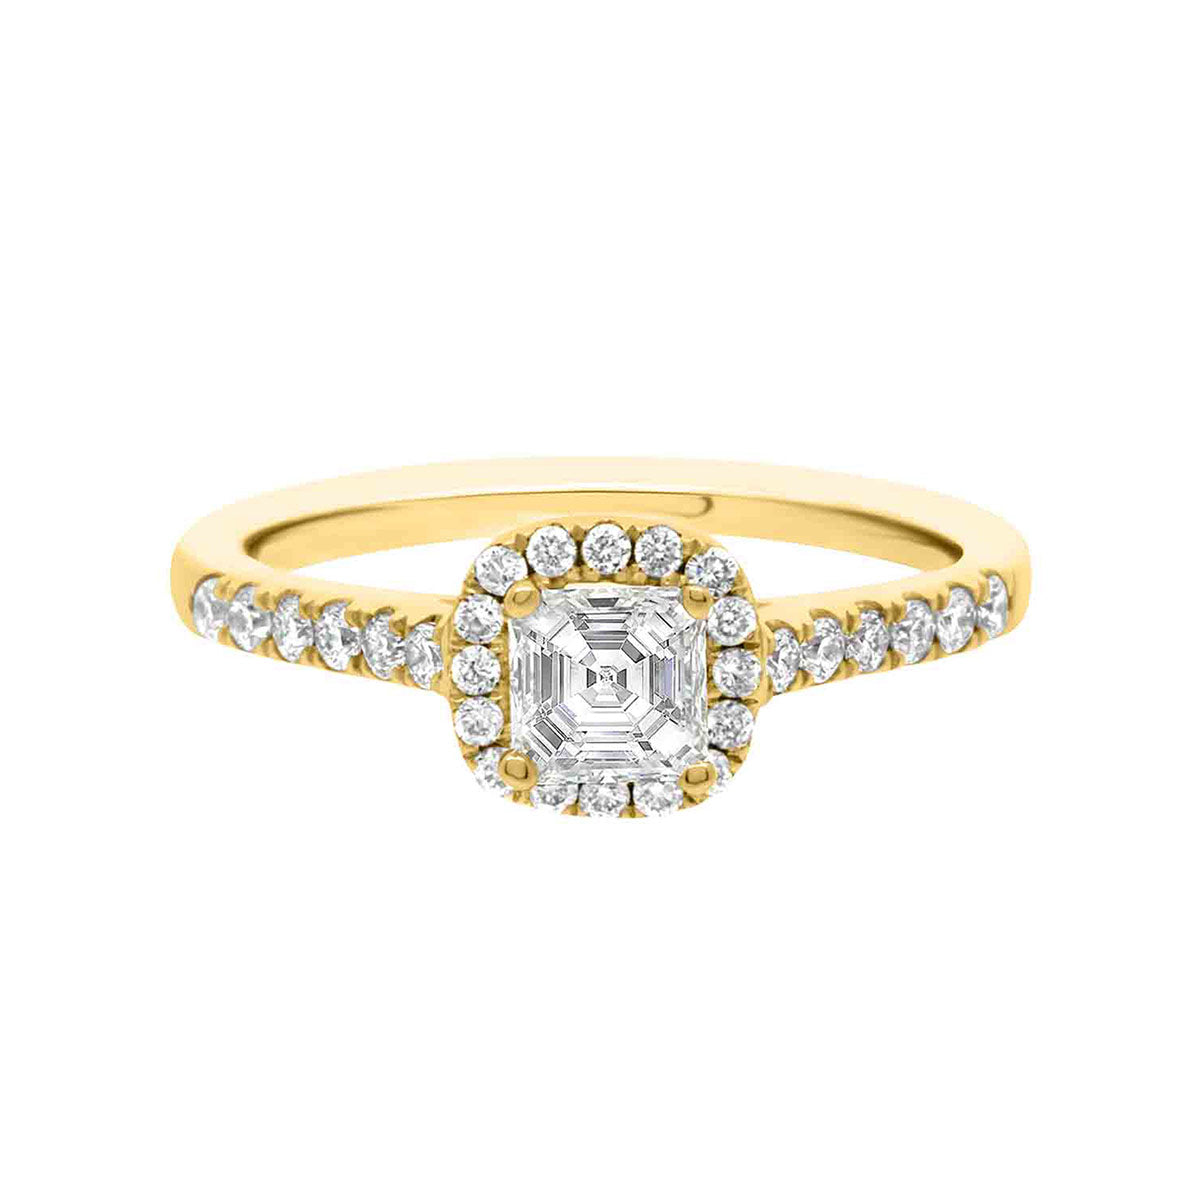 Asscher Halo Diamond Ring in yellow gold